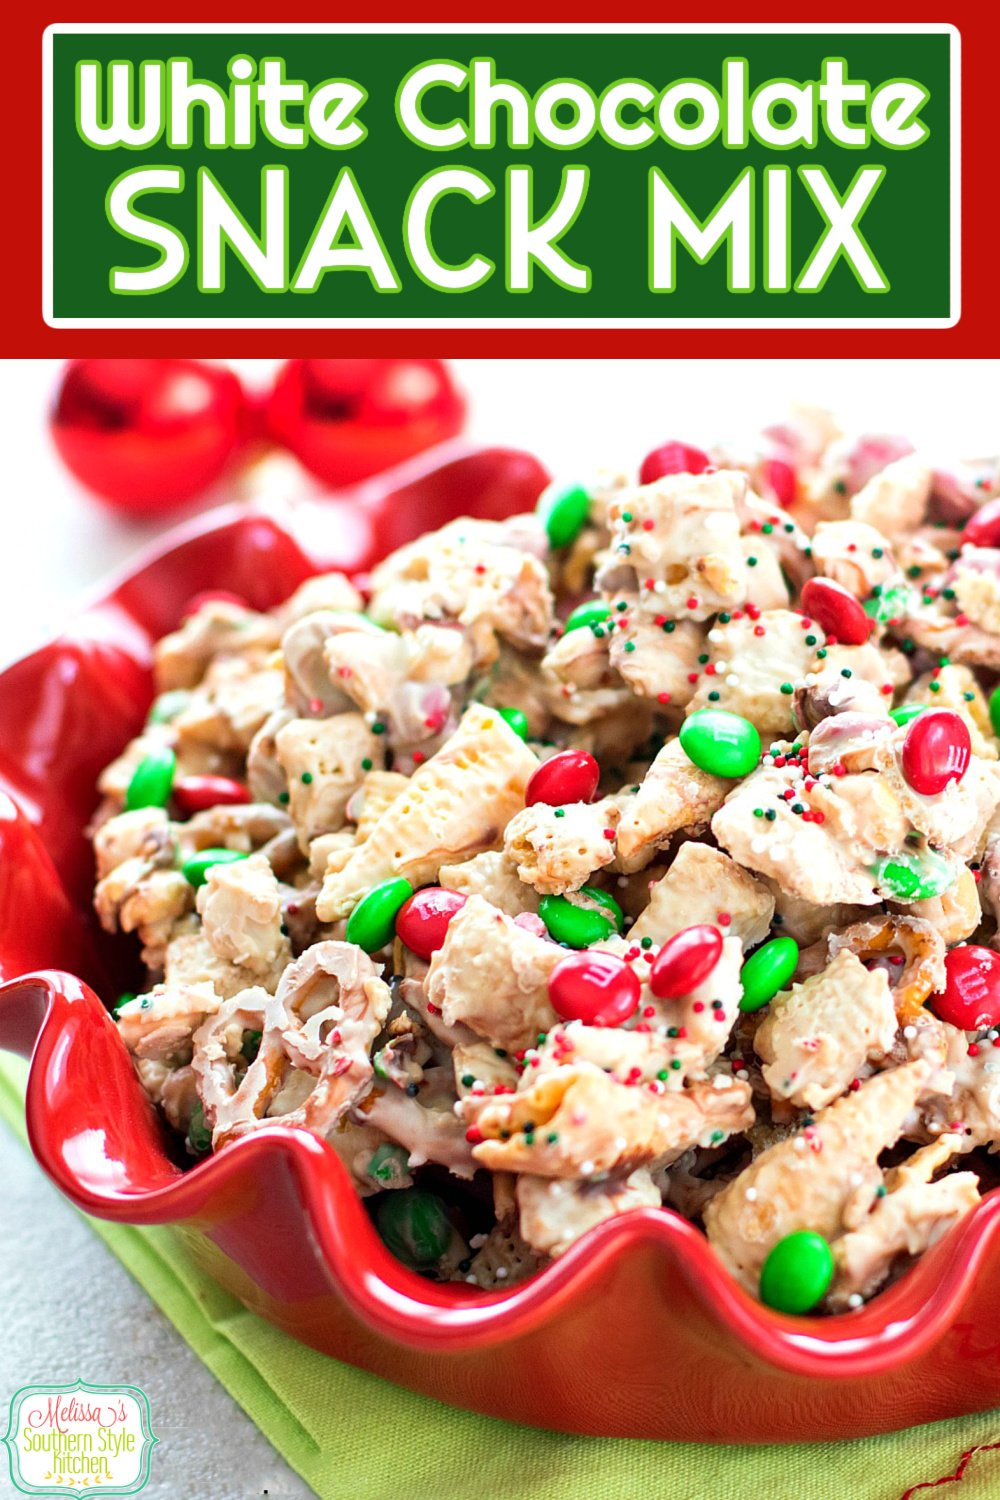 Add this insanely delicious White Chocolate Holiday Snack Mix to your holiday festivities this year! #whitechocolatesnackmix #whitechocolate #snackmix #christmassnacks #holidayreccipes #sweets #desserts #dessertfoodrecipes #chocolate #Christmascandy #holidayrecipes via @melissasssk